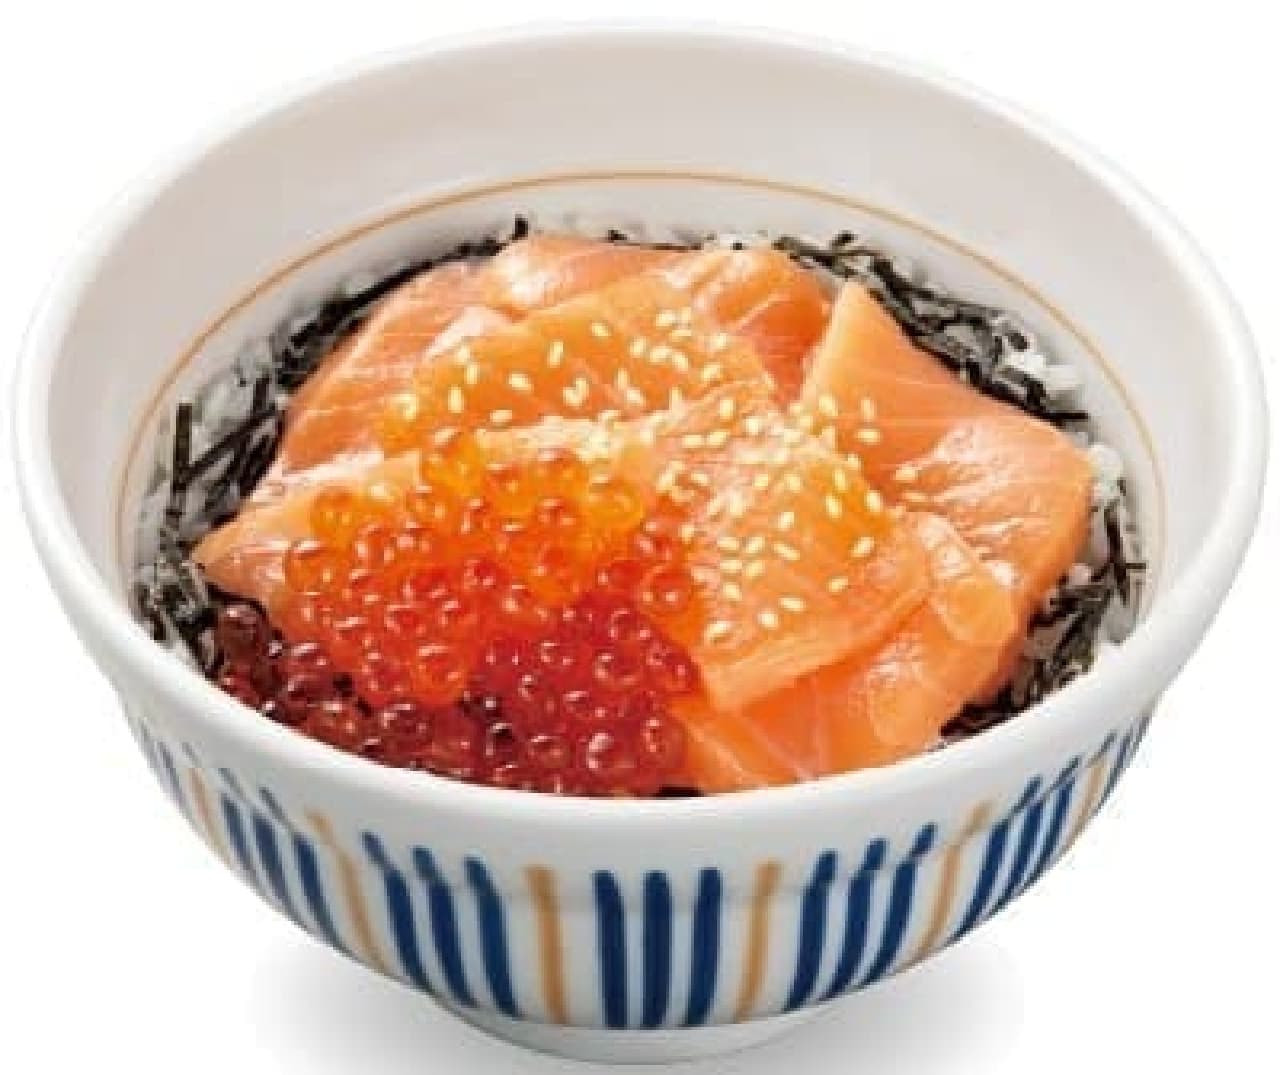 Salmon and how much seafood "parent and child" bowl (Source: Nakau official website)